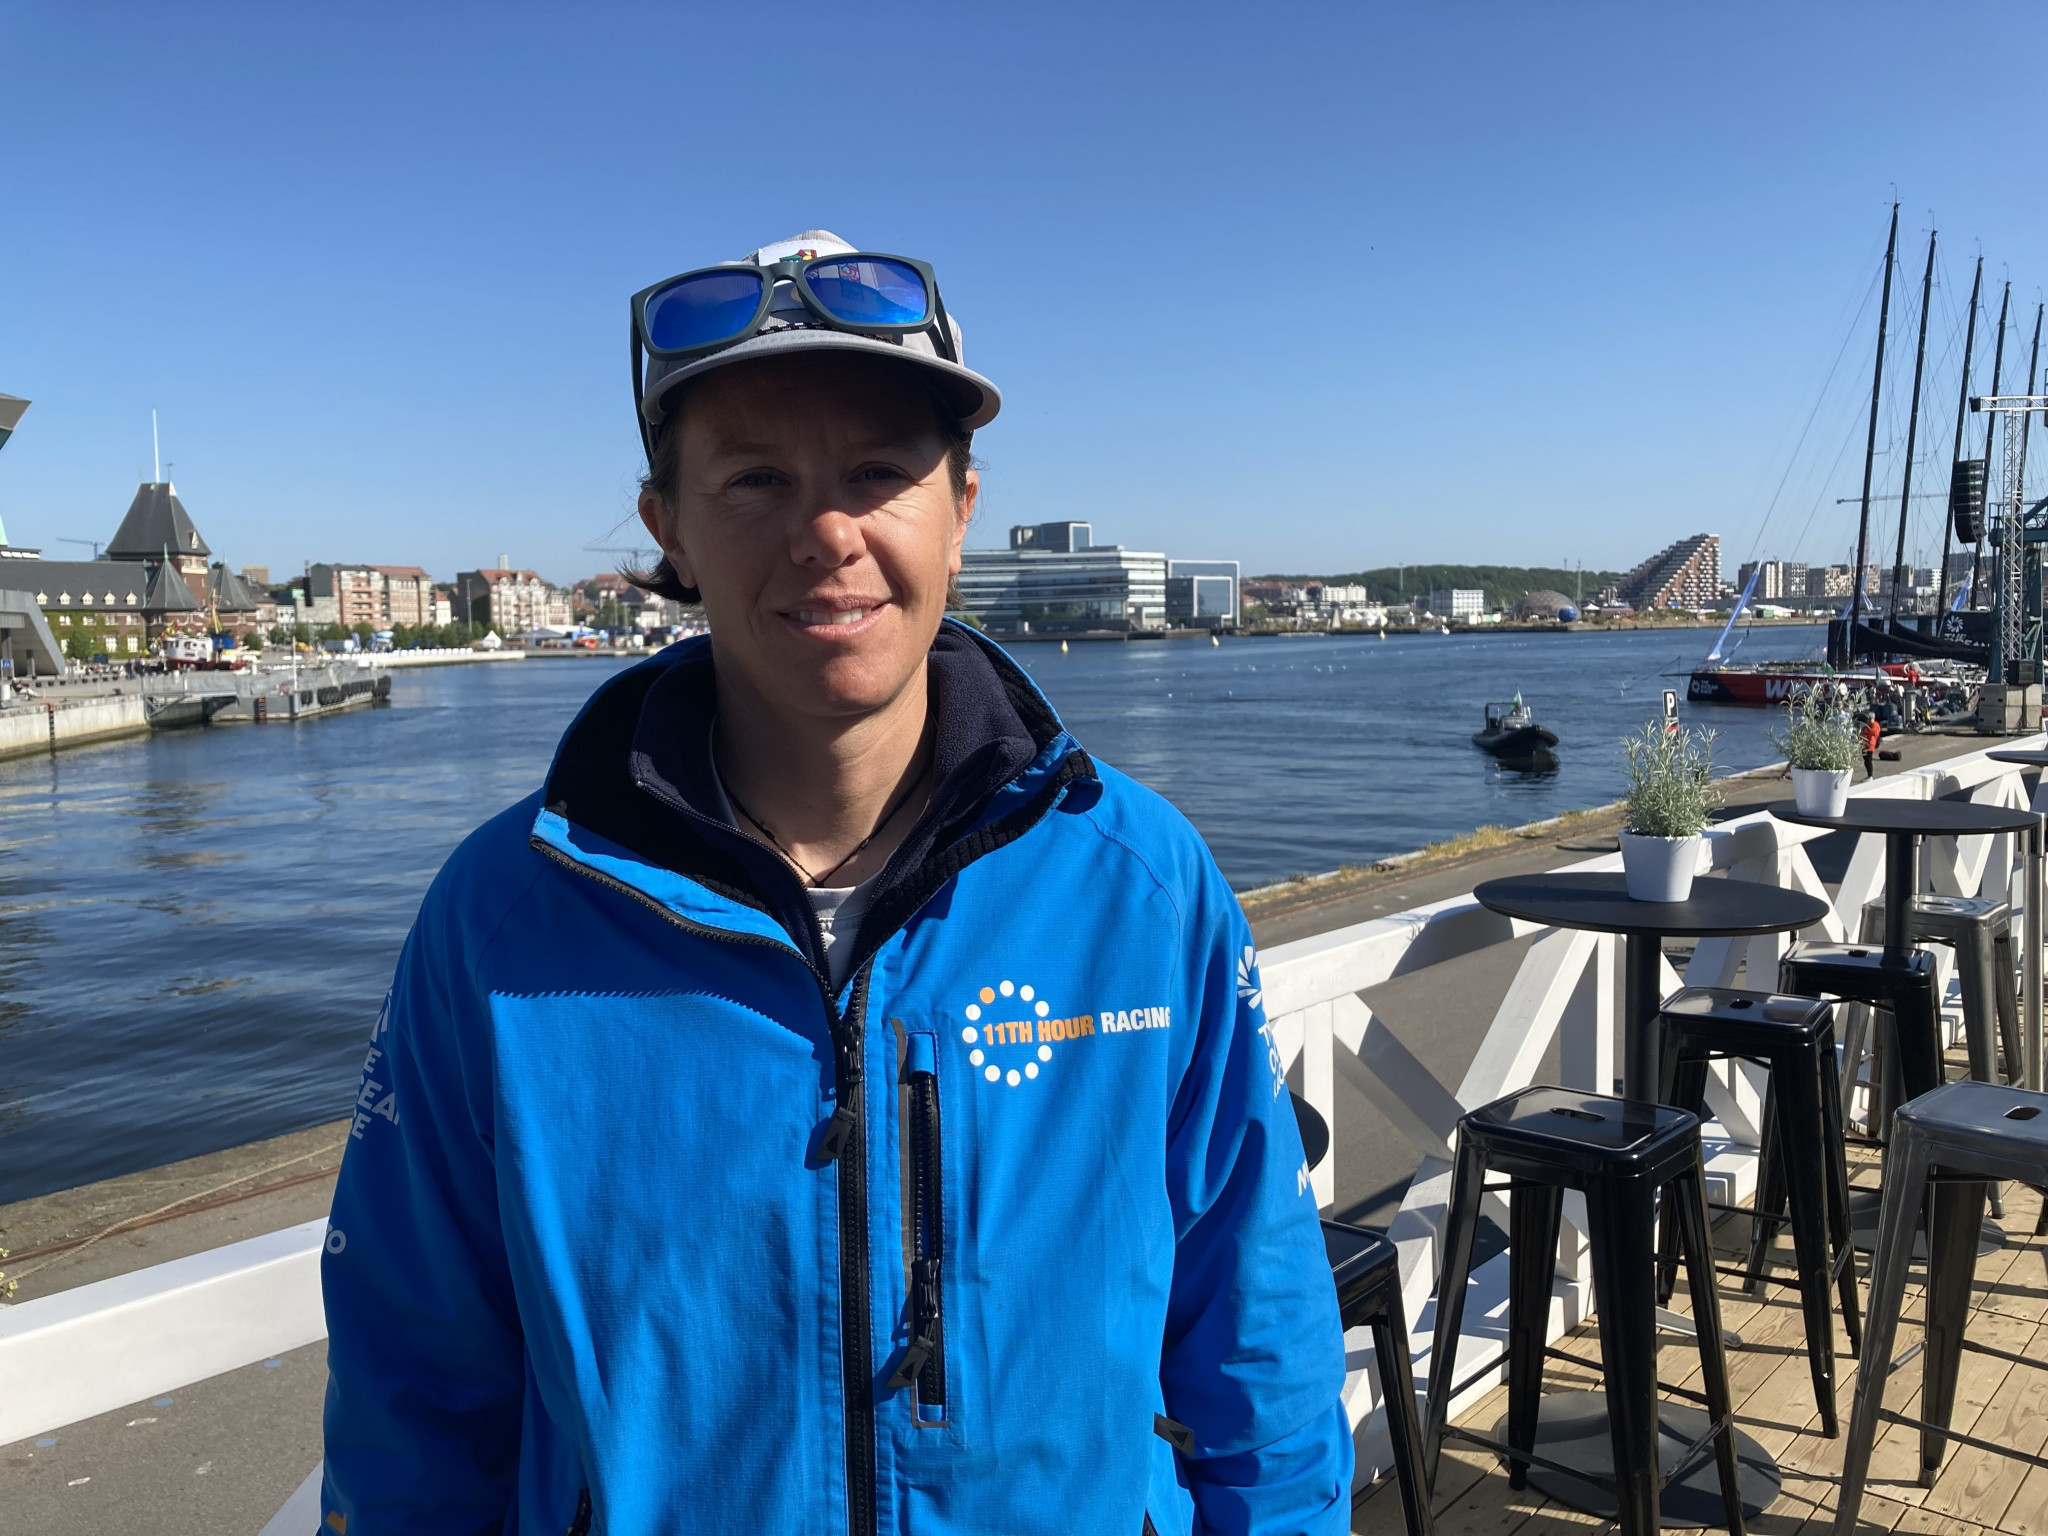 Francesca Clapcich of Italy is competing alongside men in The Ocean Race ©ITG